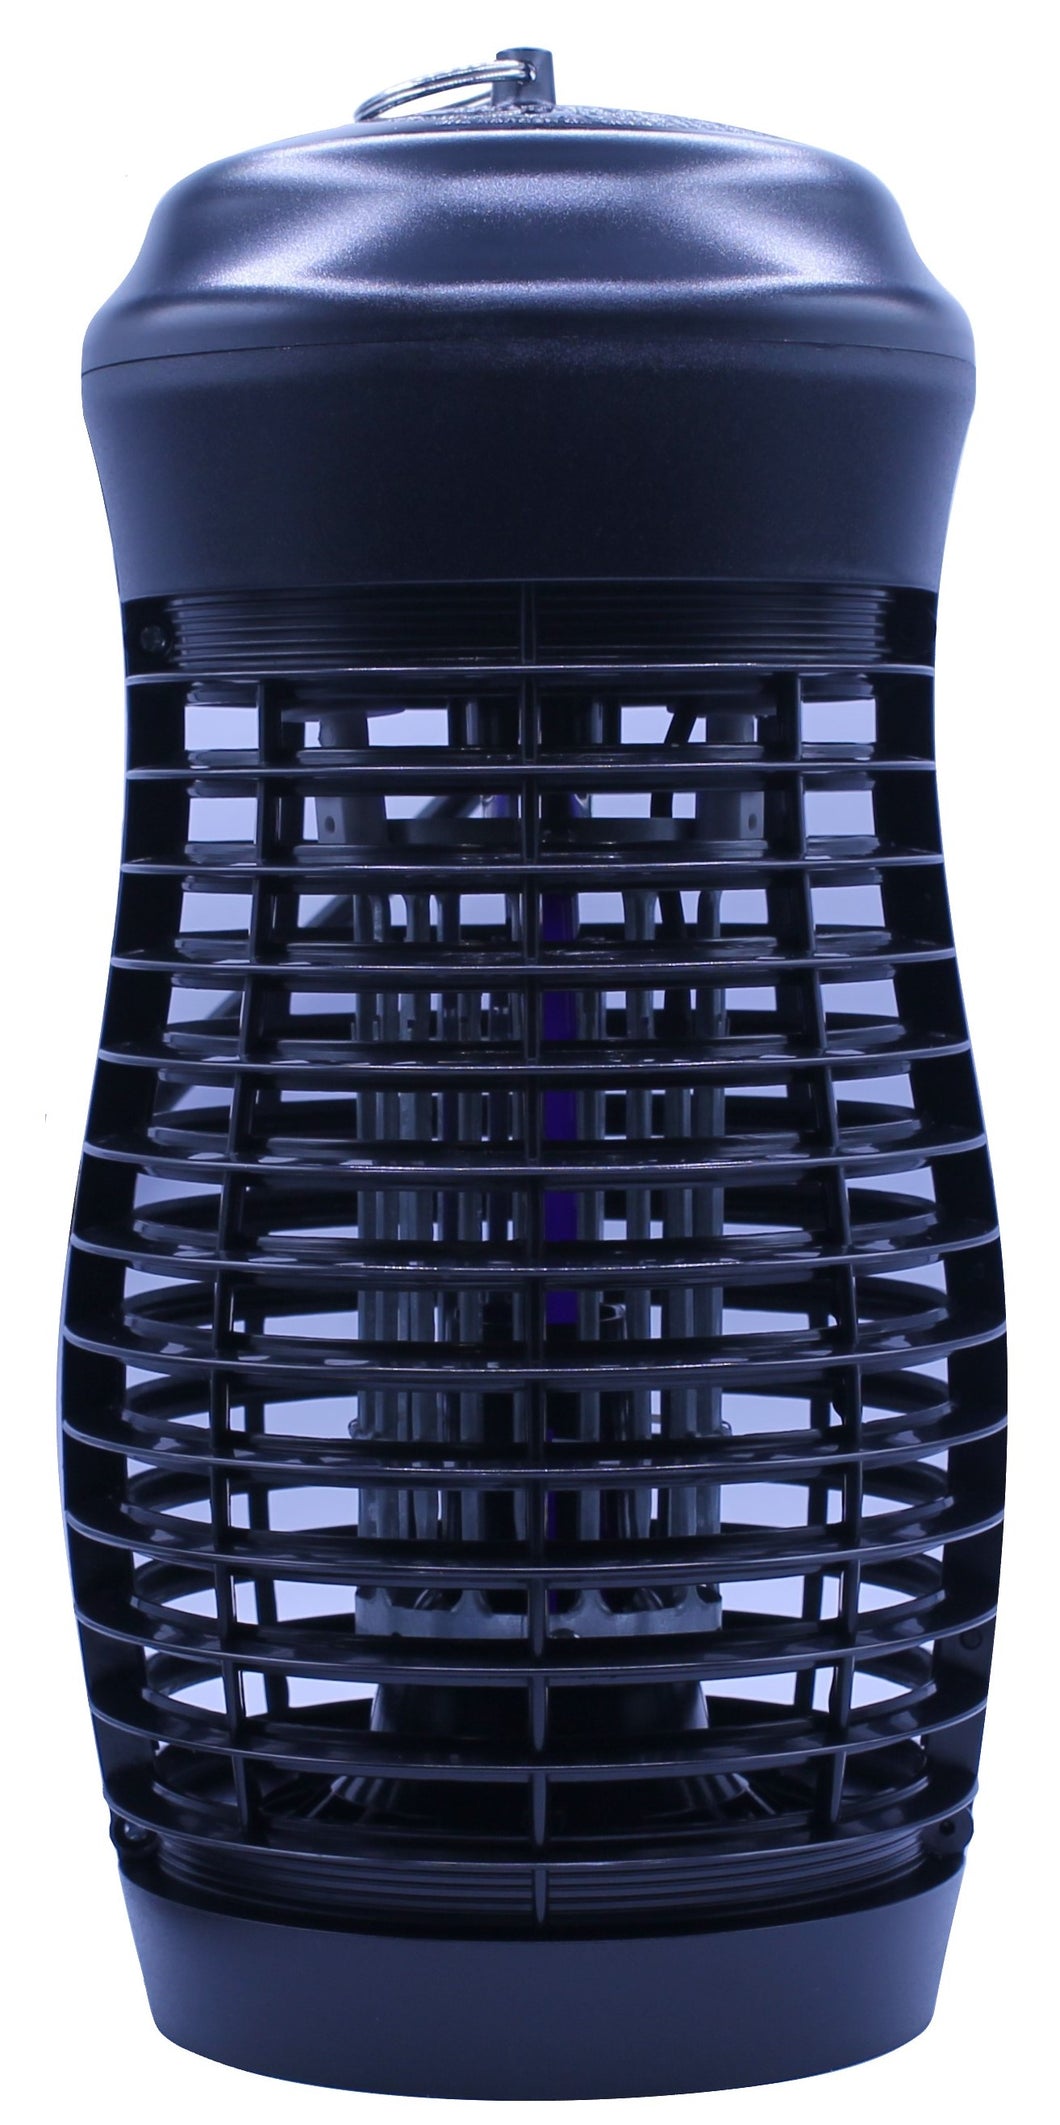 PIC 15W/1500V Bug Zapper, Kills Bugs on Contact, with Black UV Light Technology # 15W-Zapper